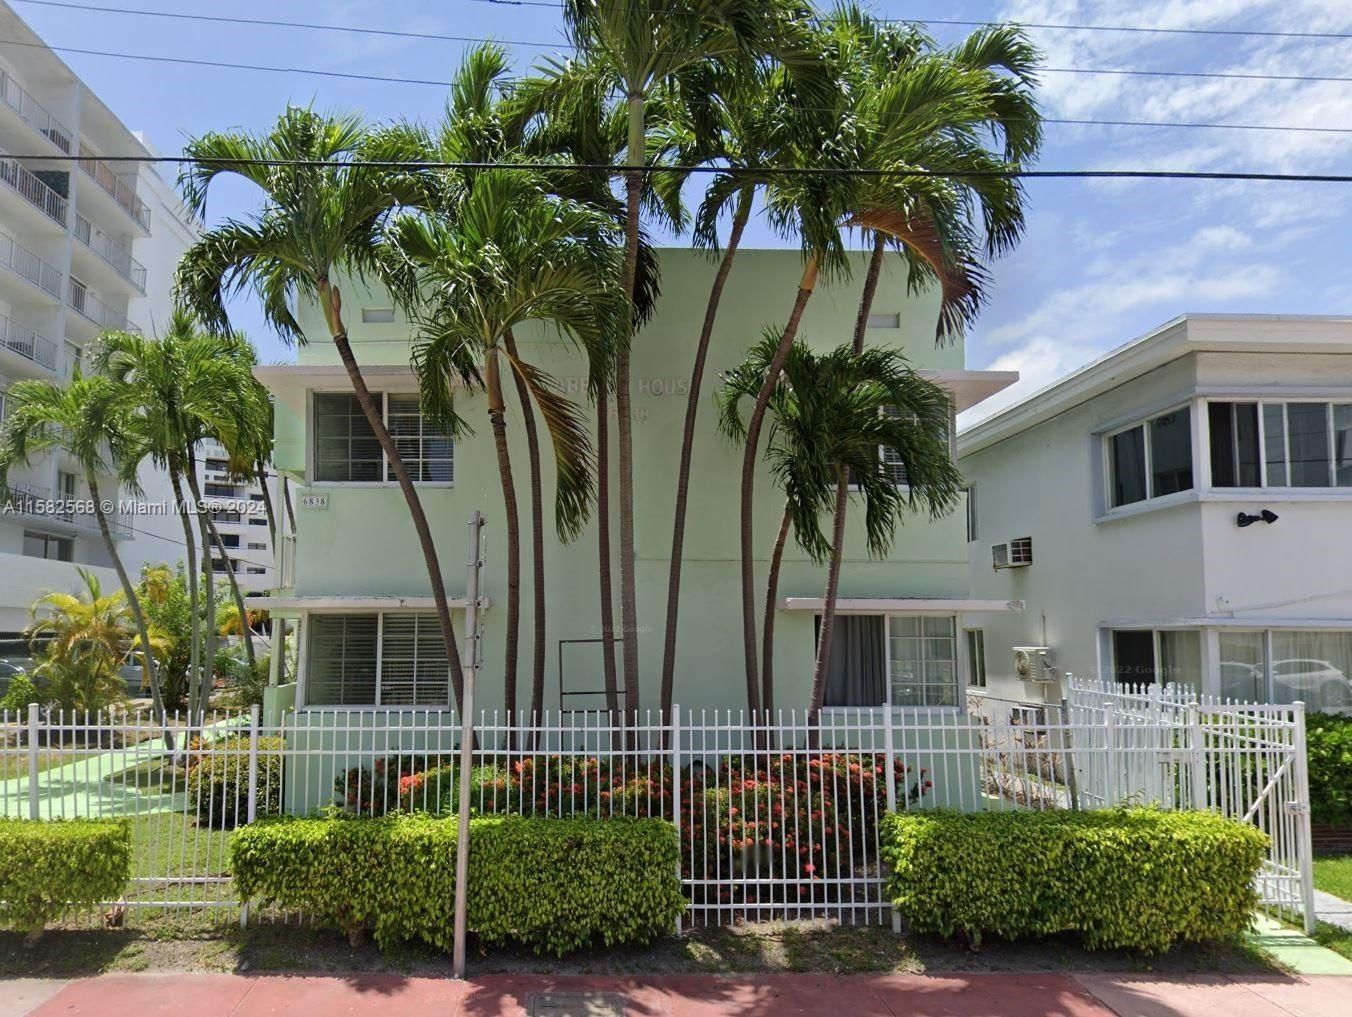 Real estate property located at 6838 Abbott Ave, Miami-Dade County, AMD PL OF 2ND OCEAN FRONT, Miami Beach, FL